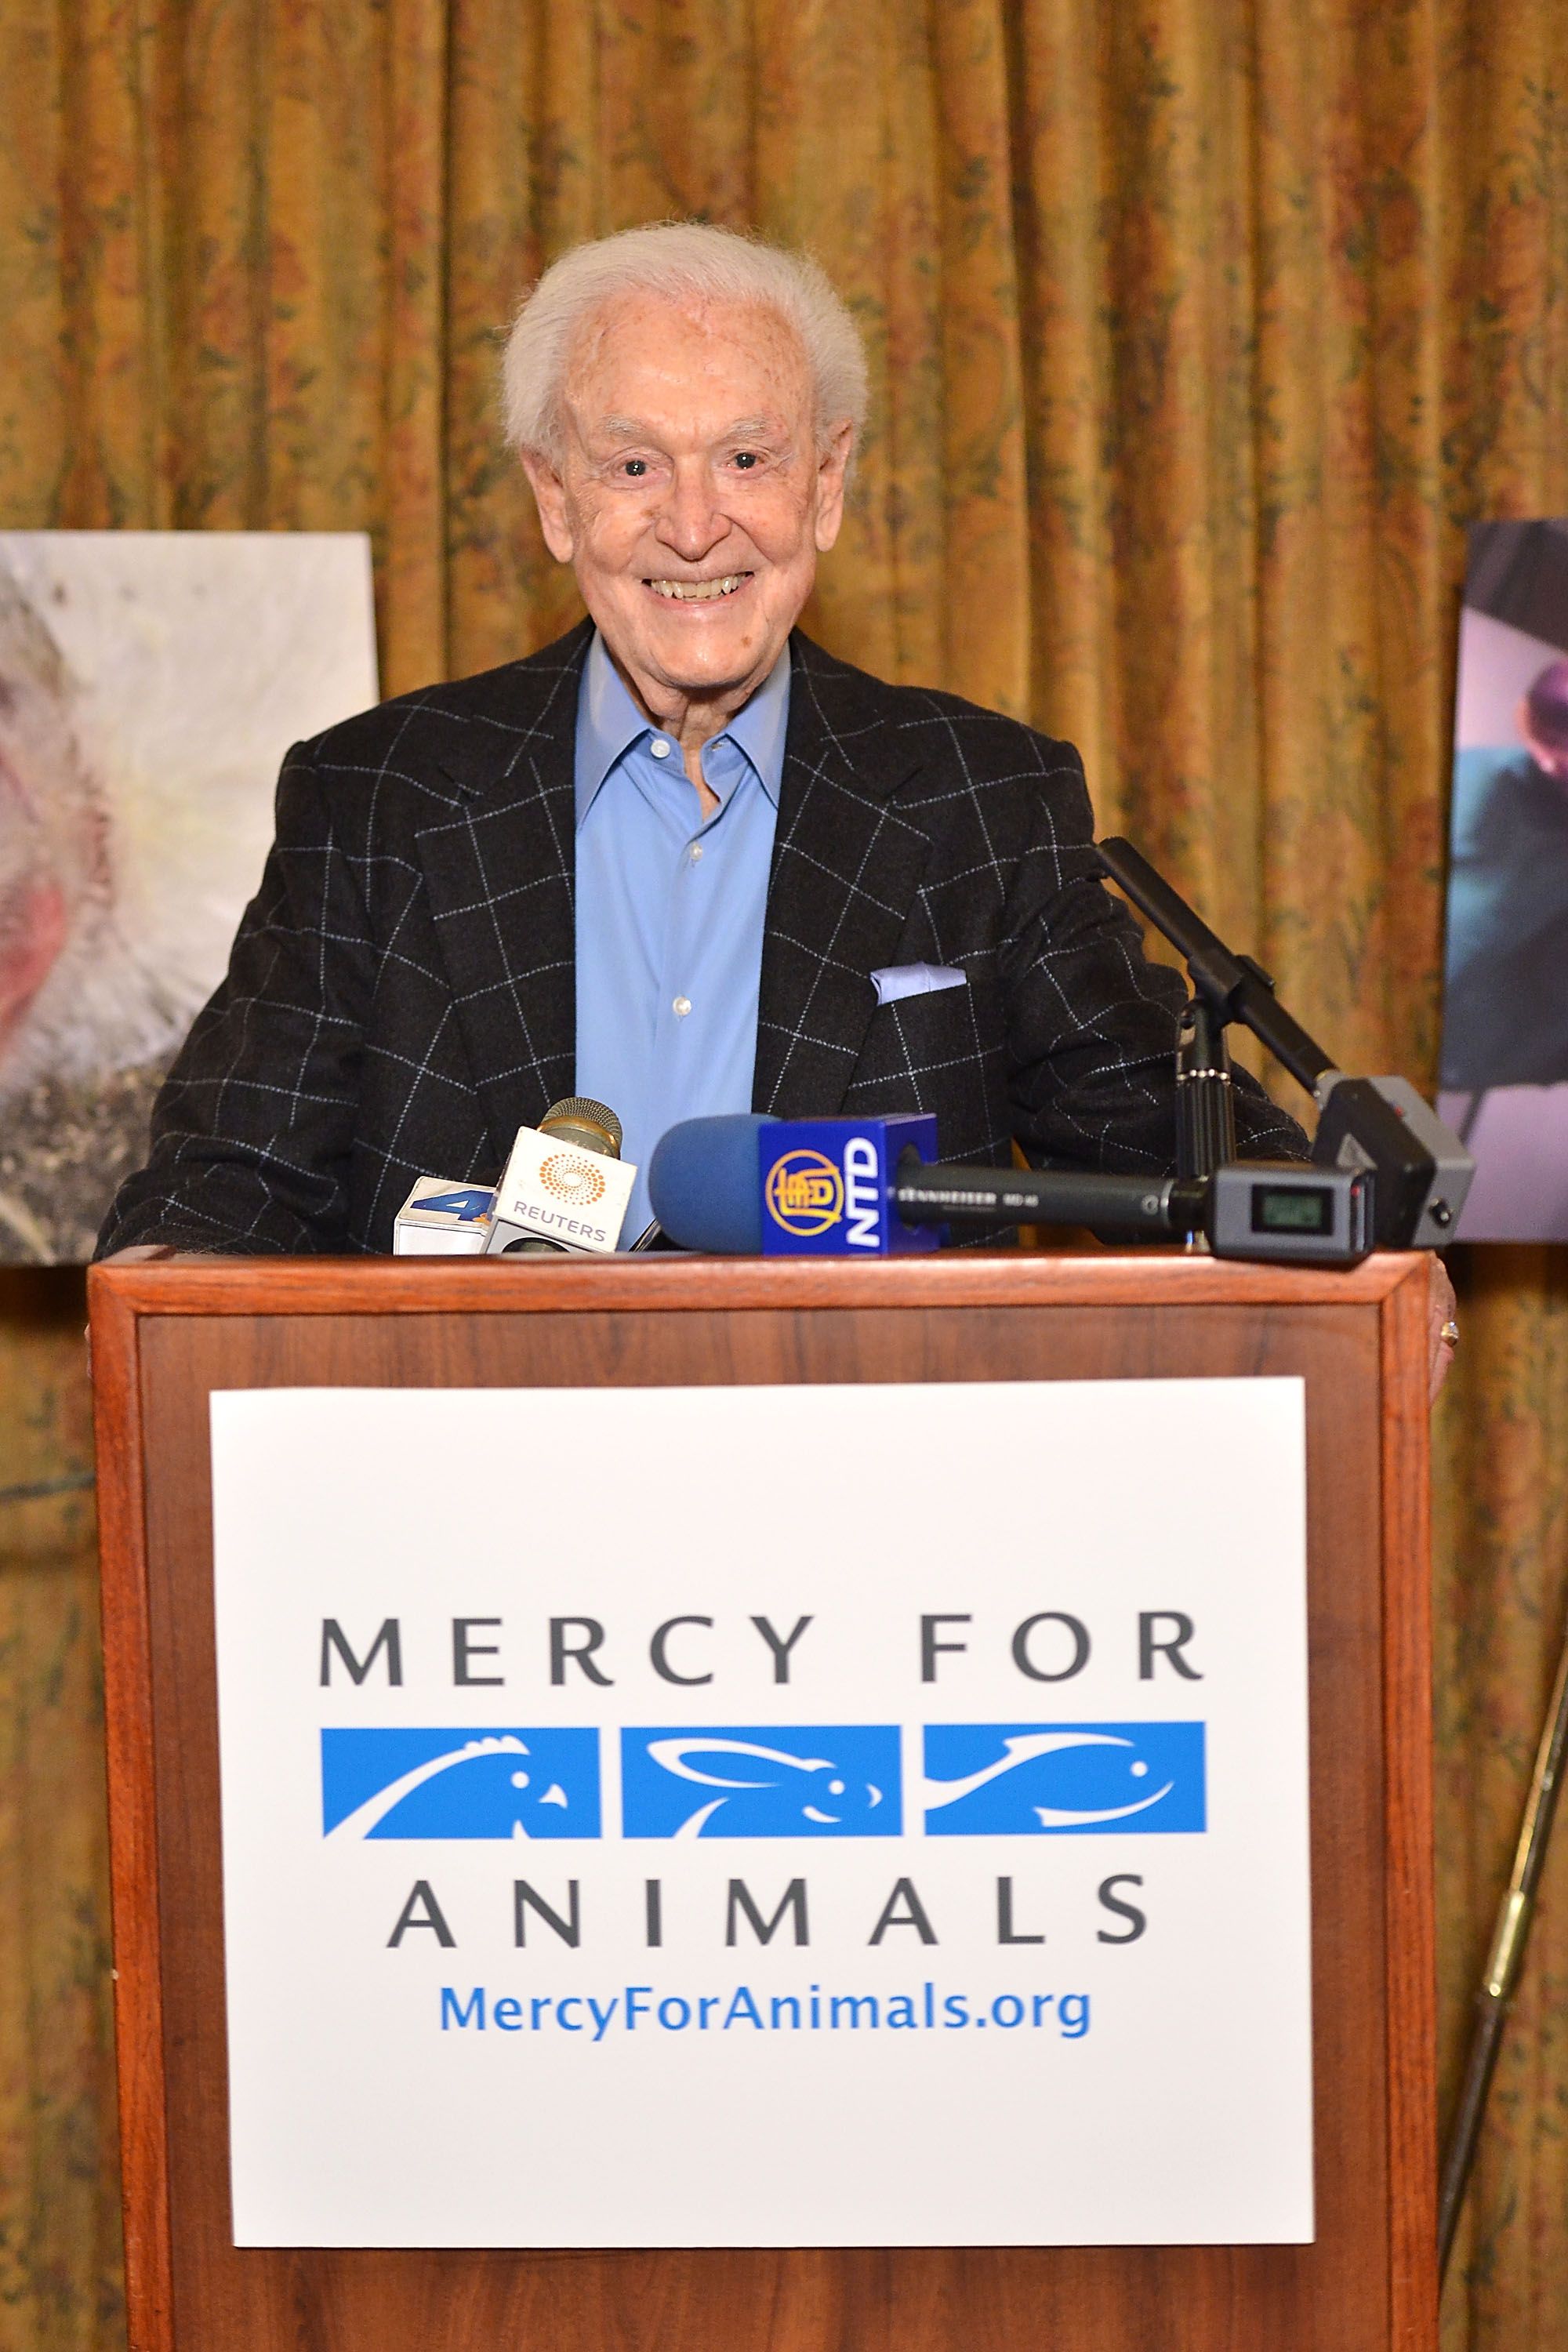 Bob Barker during the Mercy For Animals announcement at Millennium Biltmore Hotel on June 17, 2015, in Los Angeles, California. | Source: Getty Images